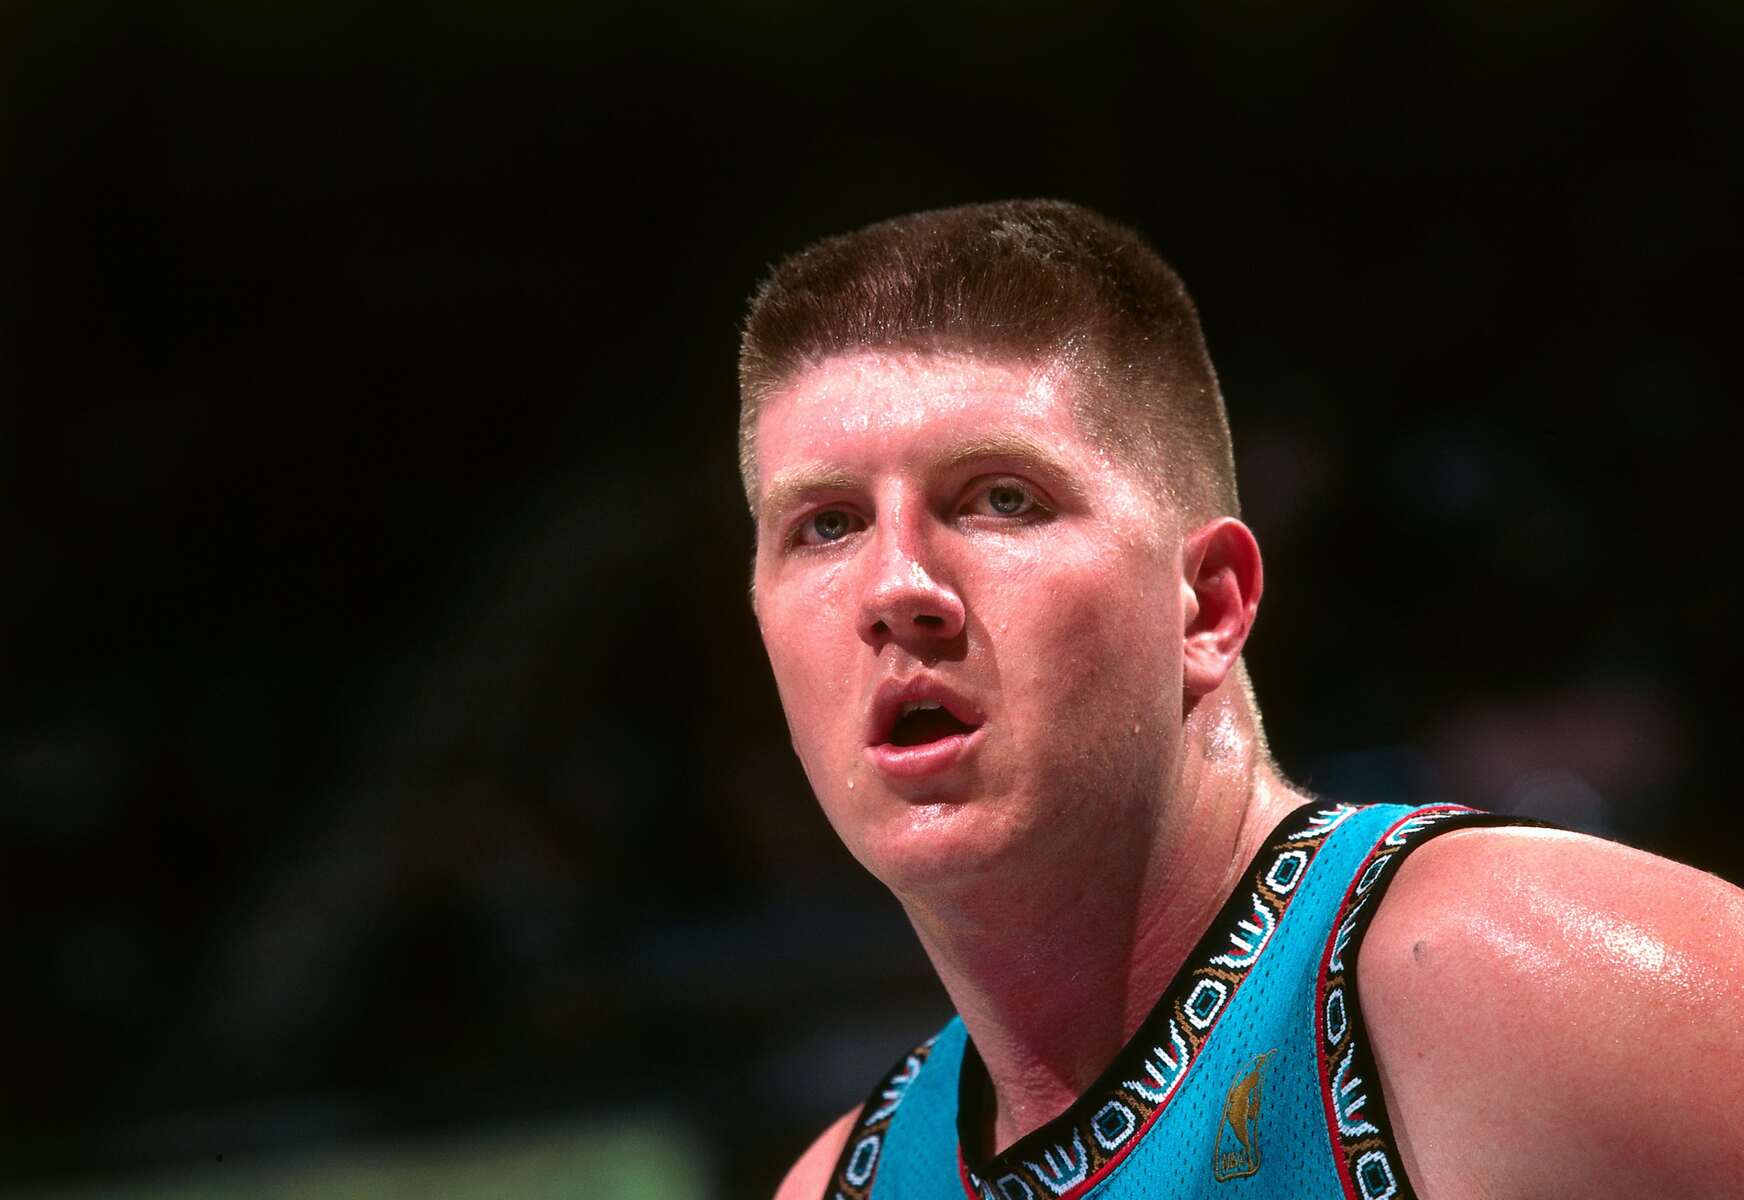 22-mind-blowing-facts-about-bryant-reeves